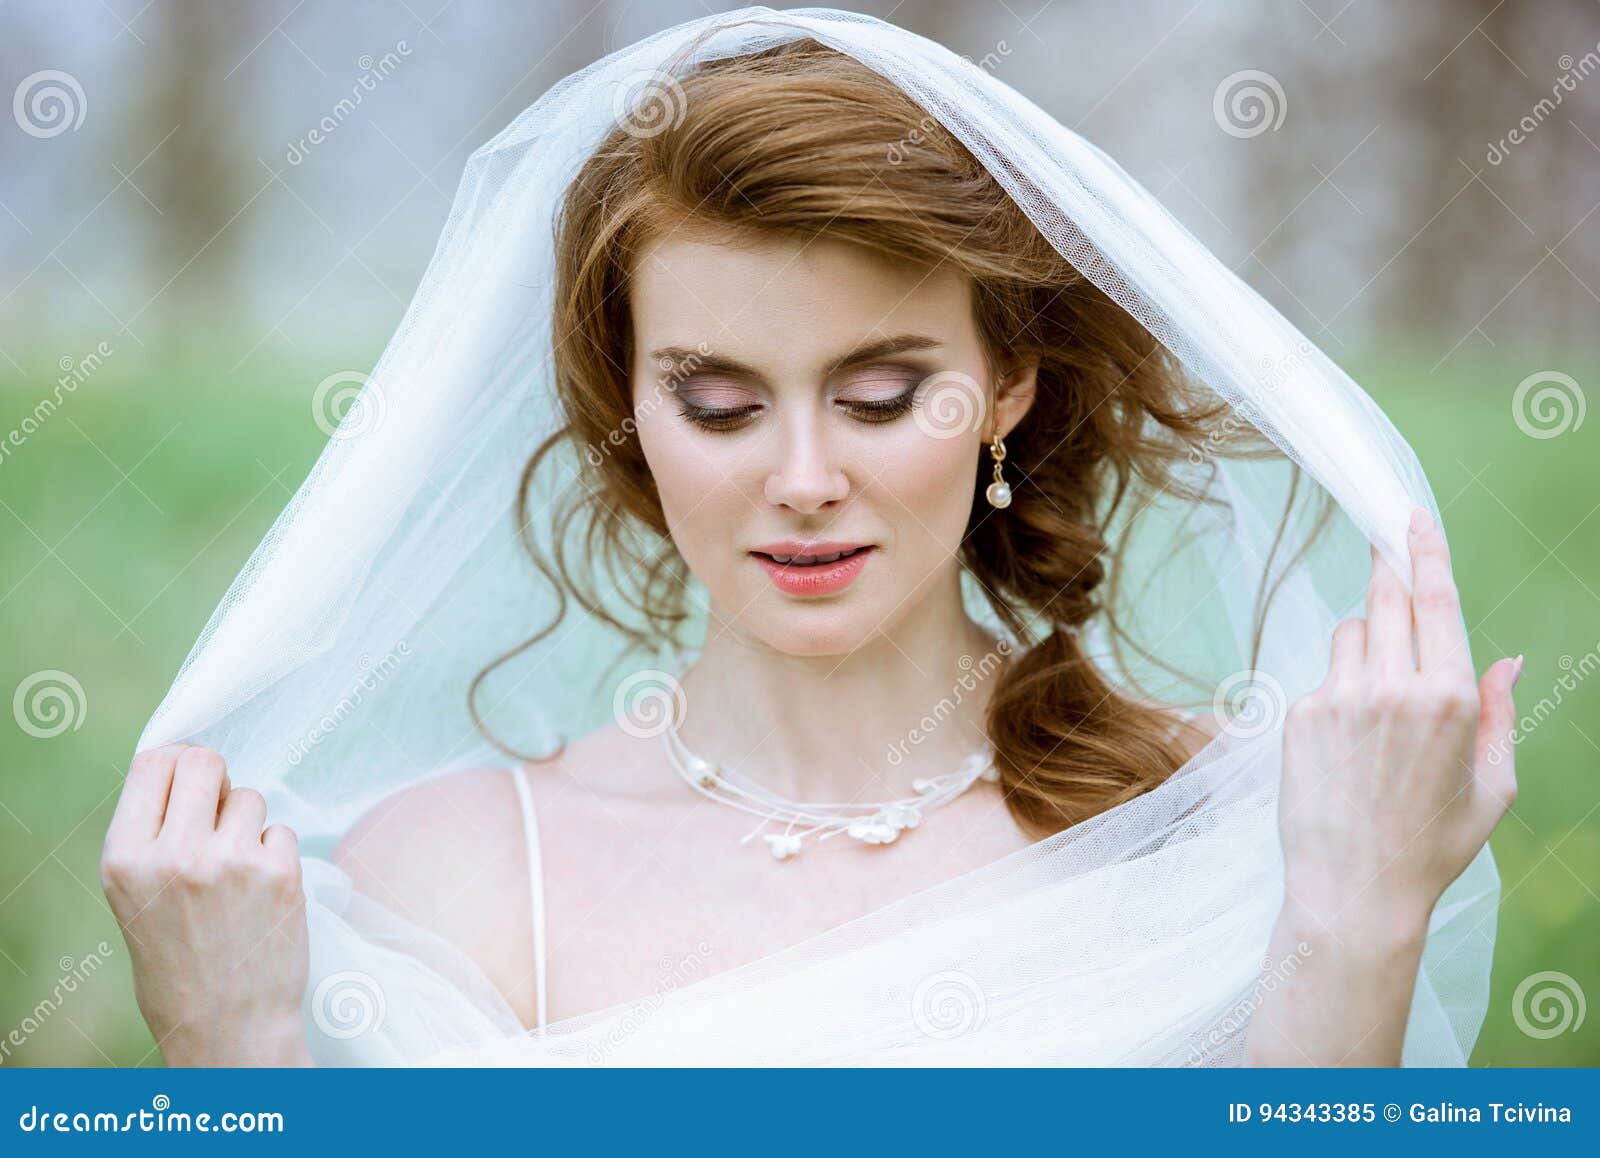 Closeup Blonde Bride with Fashion Wedding Hairstyle and Makeup Stock Image  - Image of face, glamour: 94343385